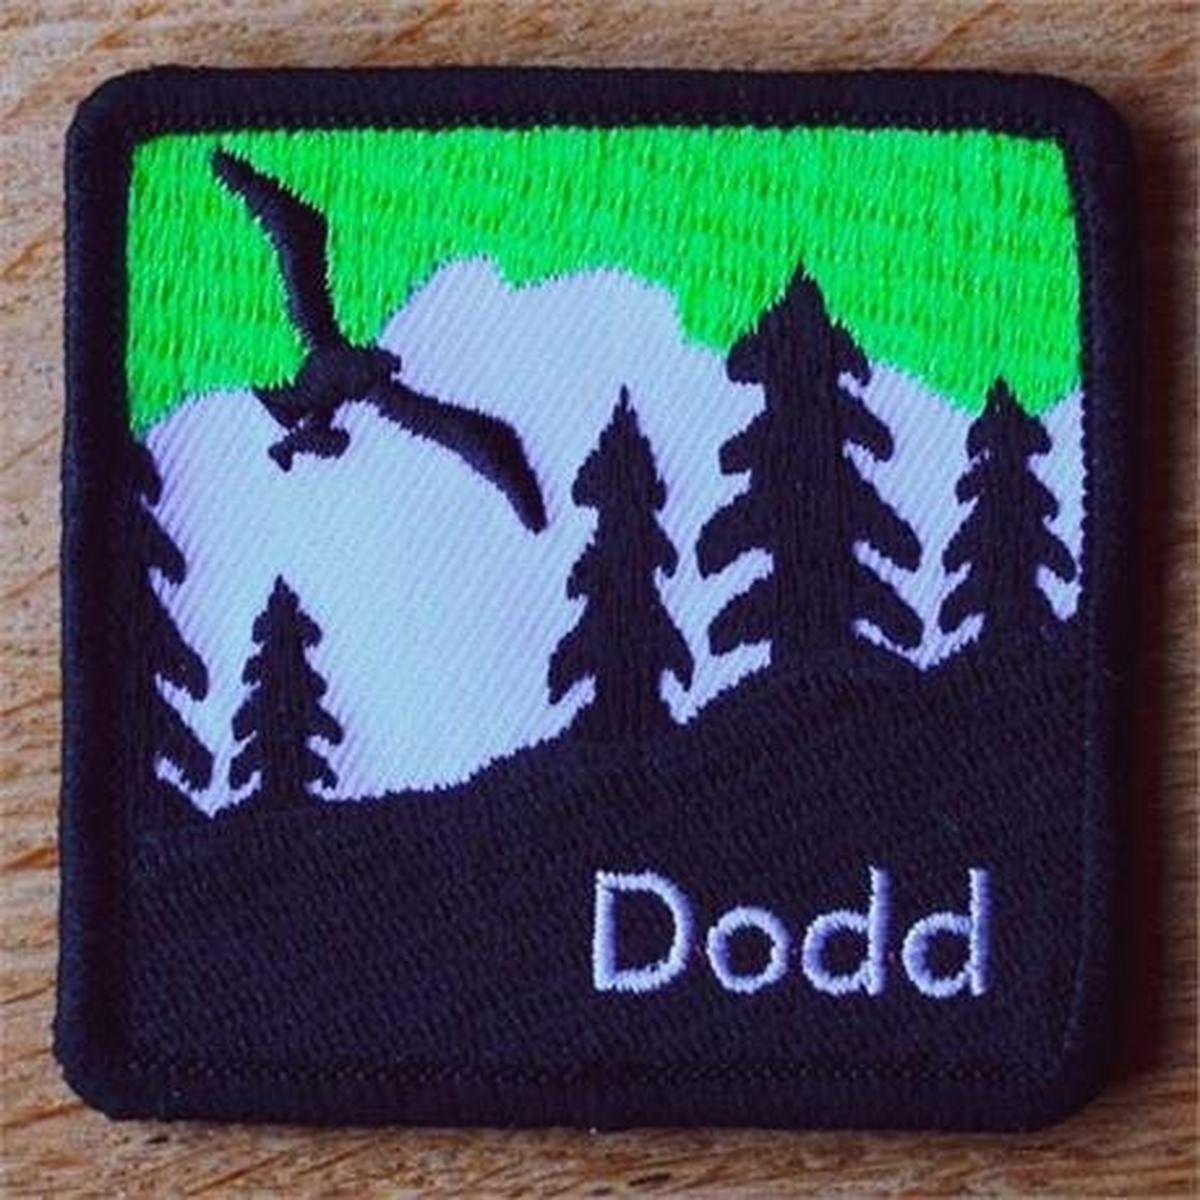 Conquer Lake District Patch - Dodd